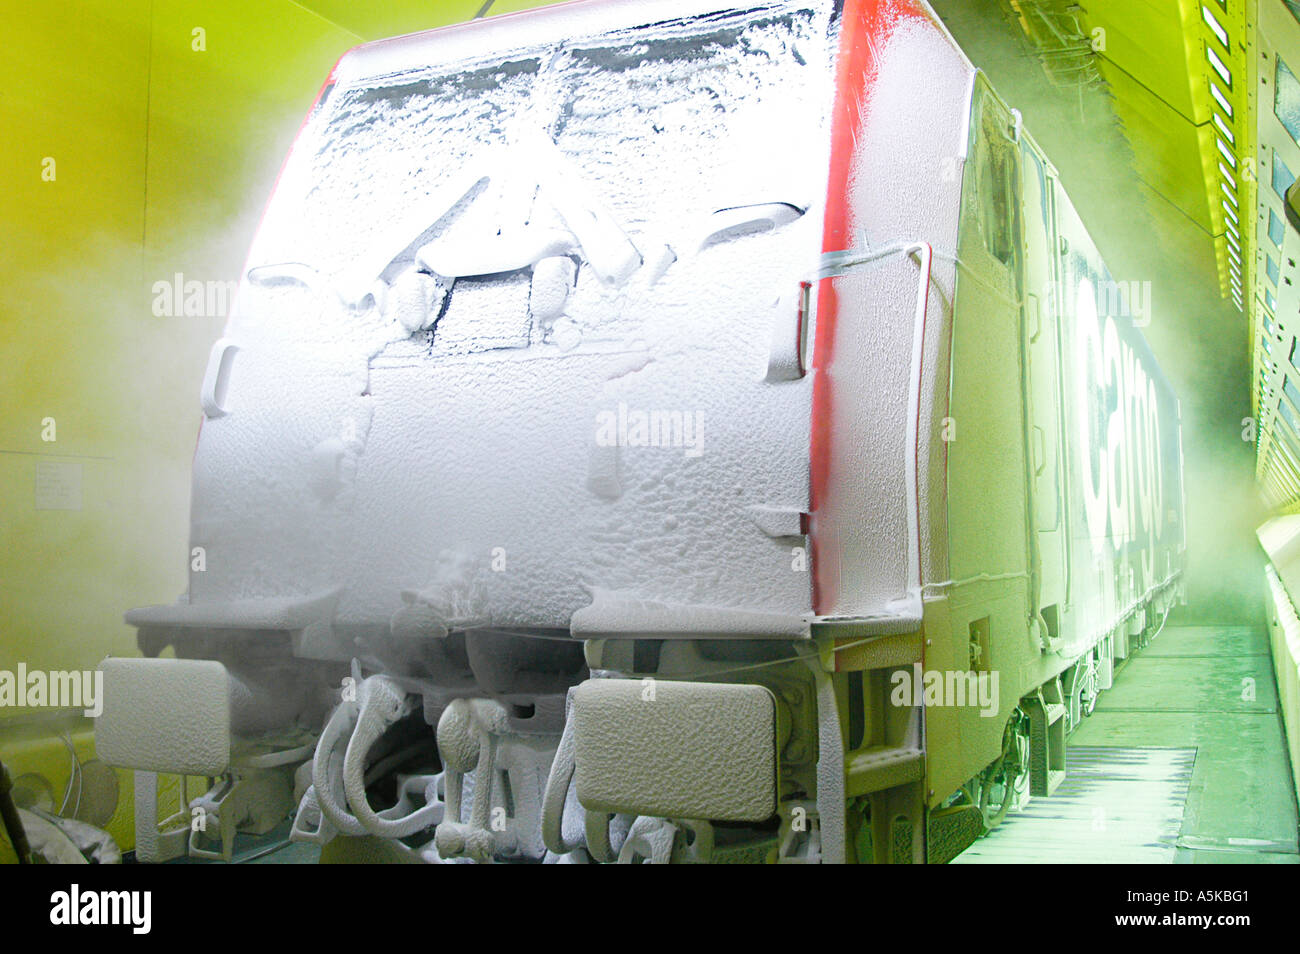 A train that was snowed in for testing in the Artificial Climate Wind Channel , RTA Rail Tec Arsenal, Vienna, Austria Stock Photo